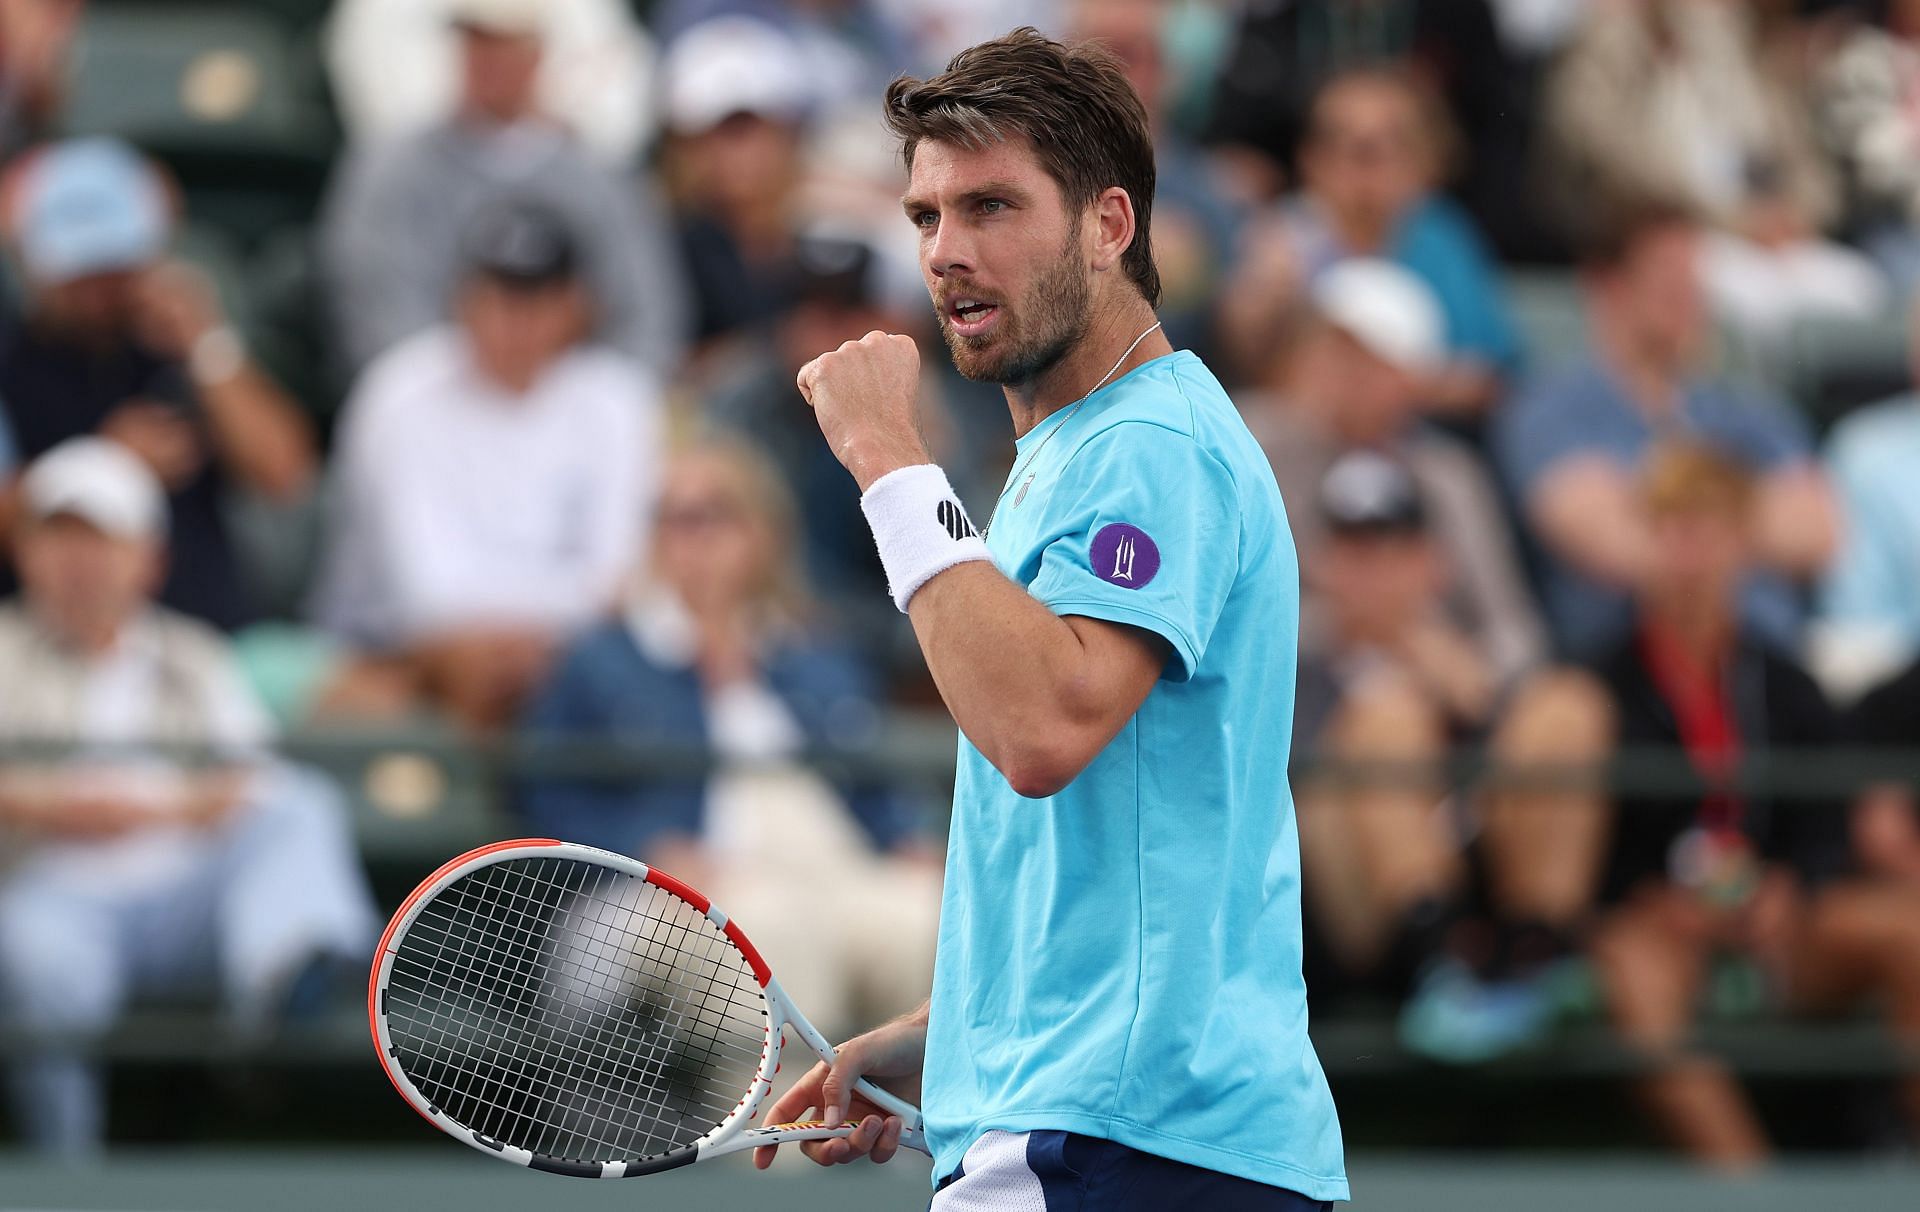 Cameron Norrie at the BNP Paribas Open